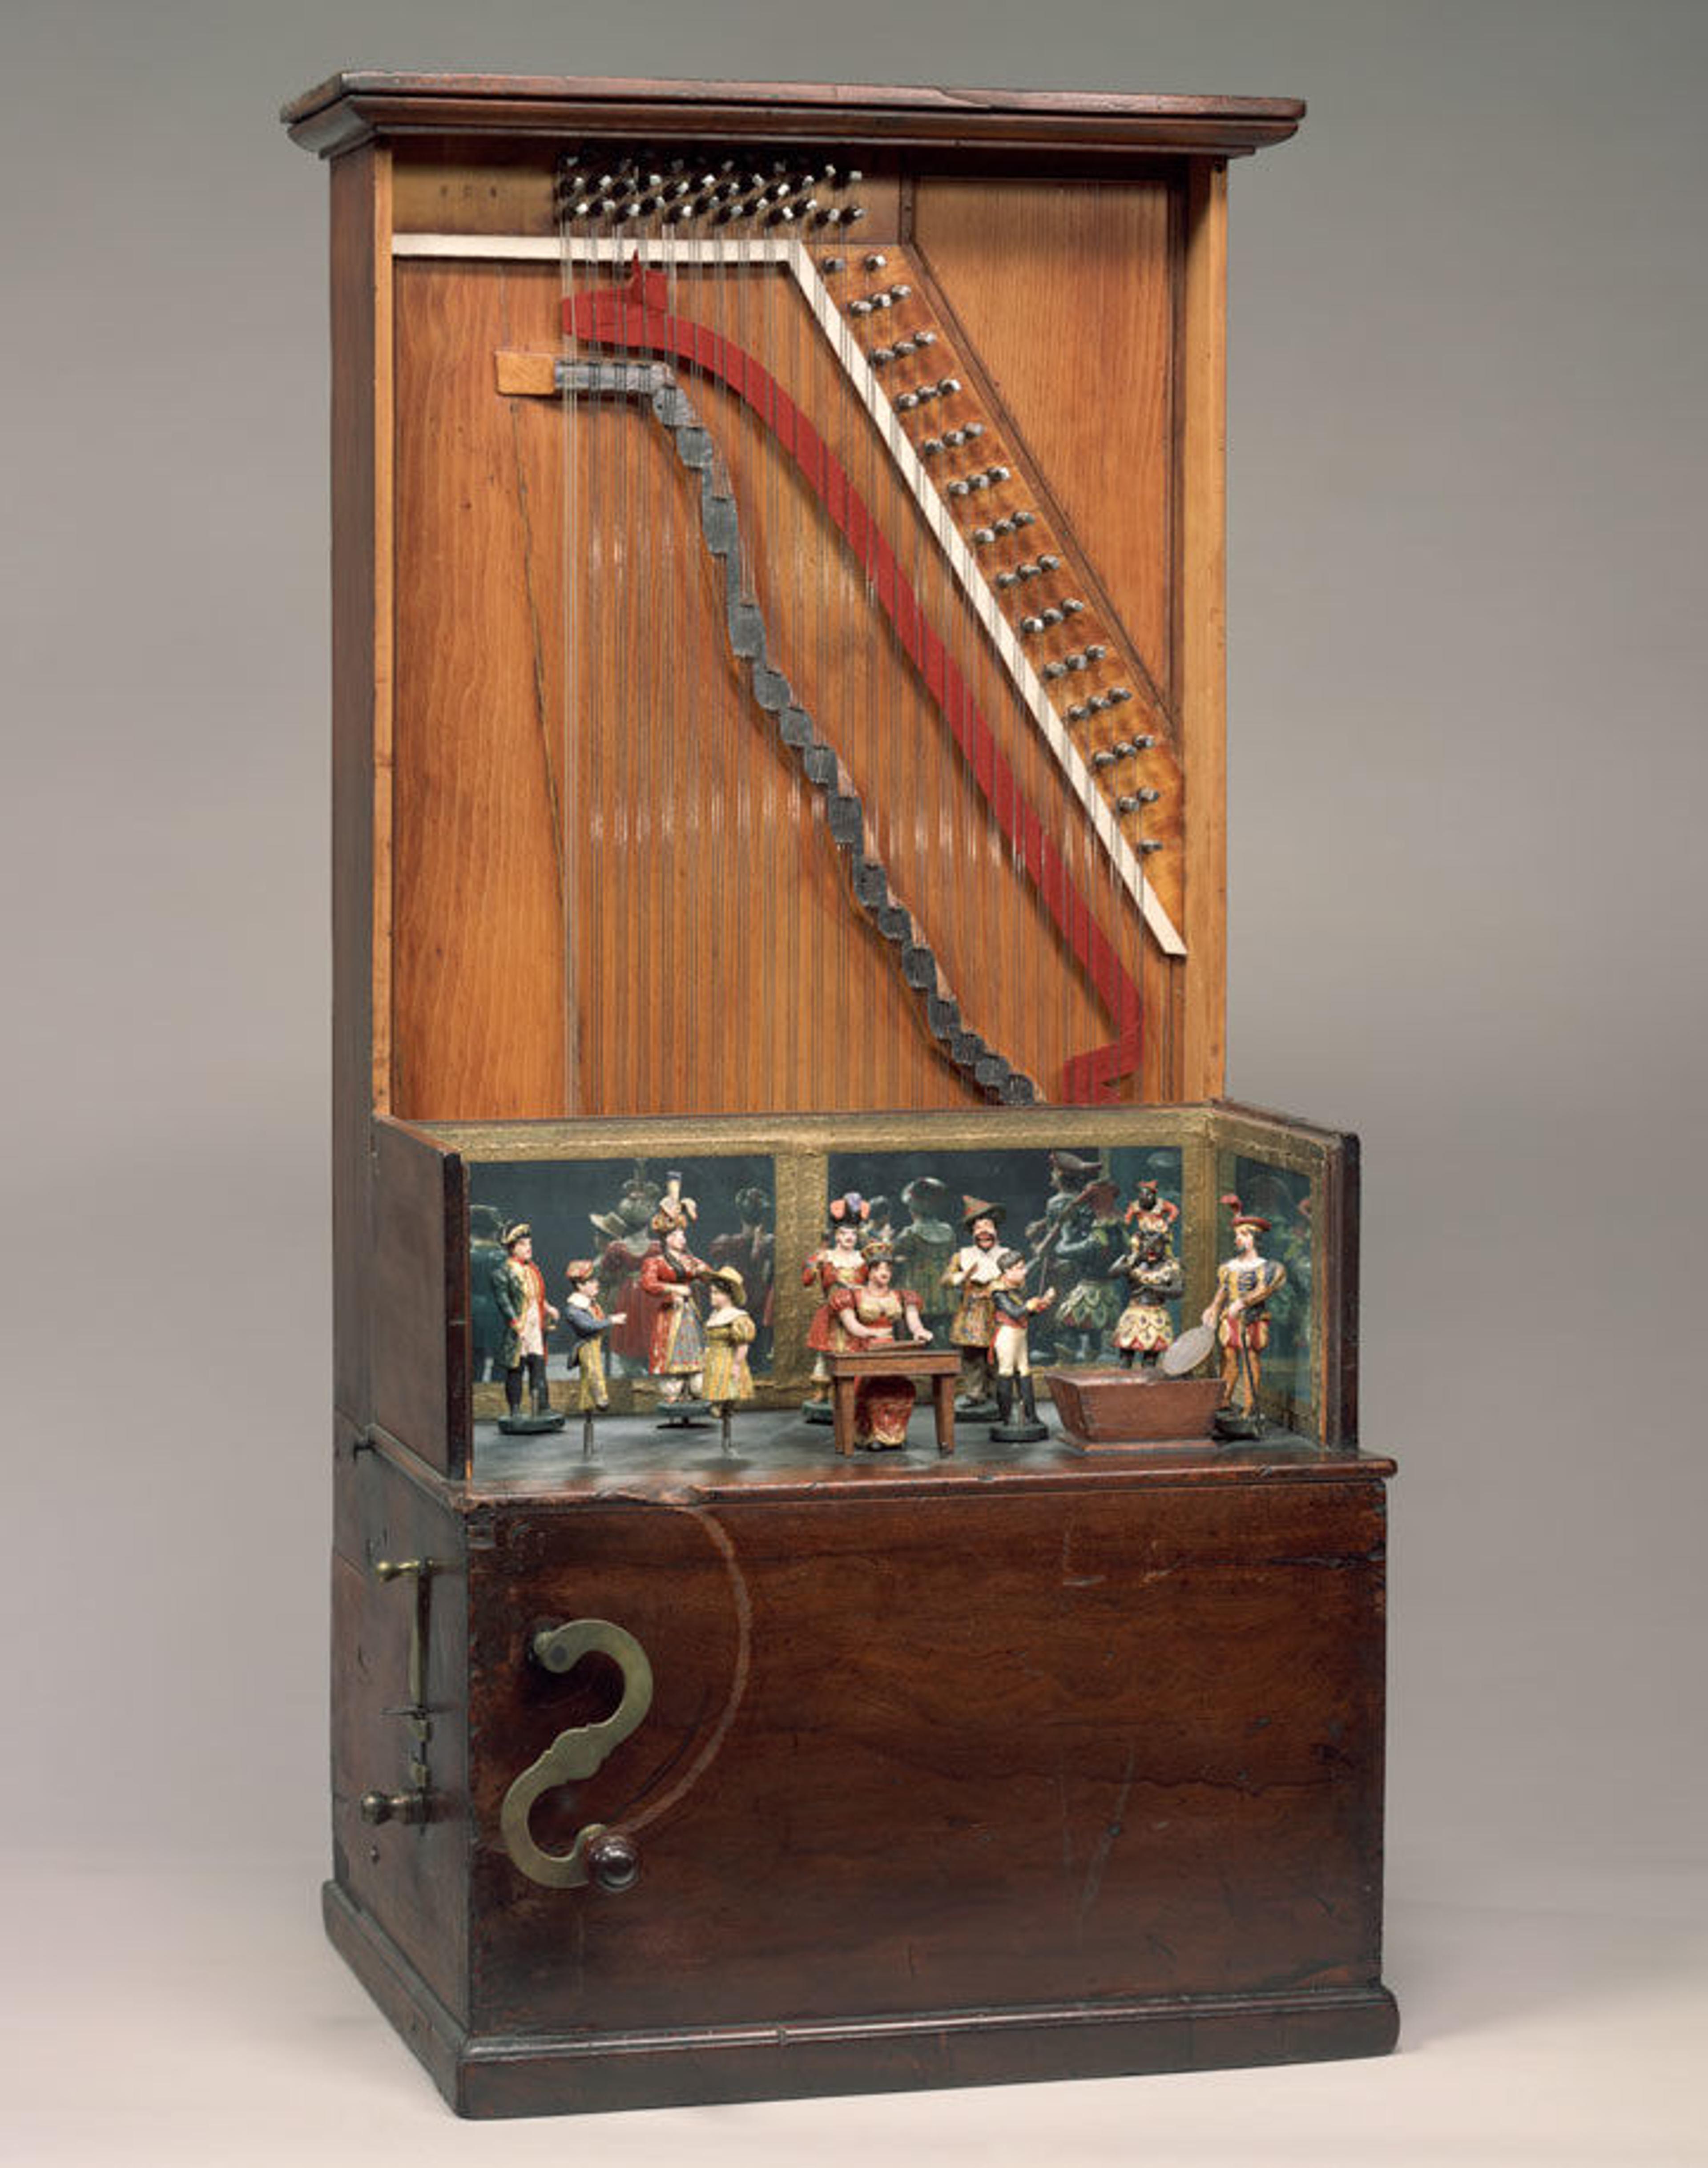 Barrel piano showing exposed piano strings and a series of costumed puppets